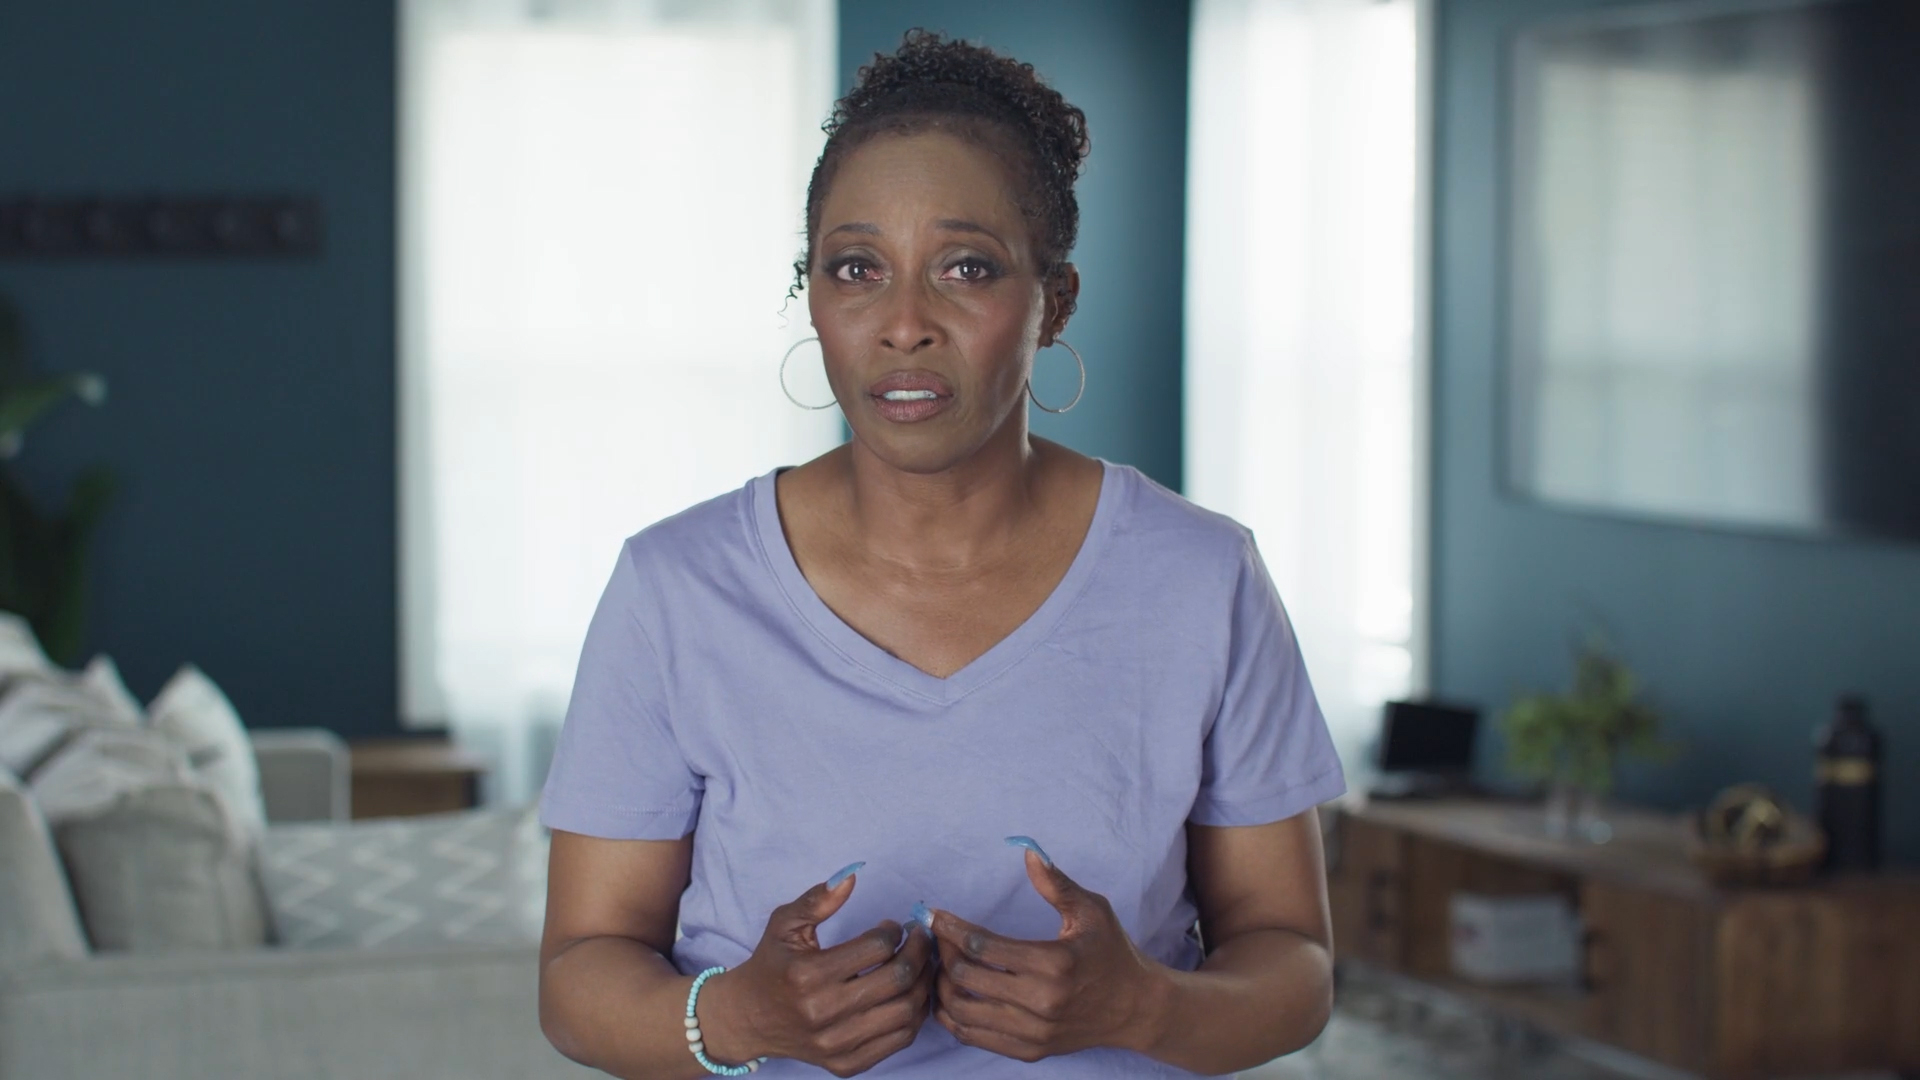 Three-time Olympic gold medalist Gail Devers takes back control of her health from Thyroid Eye Disease (TED) by writing her own "Dear TED" letter.